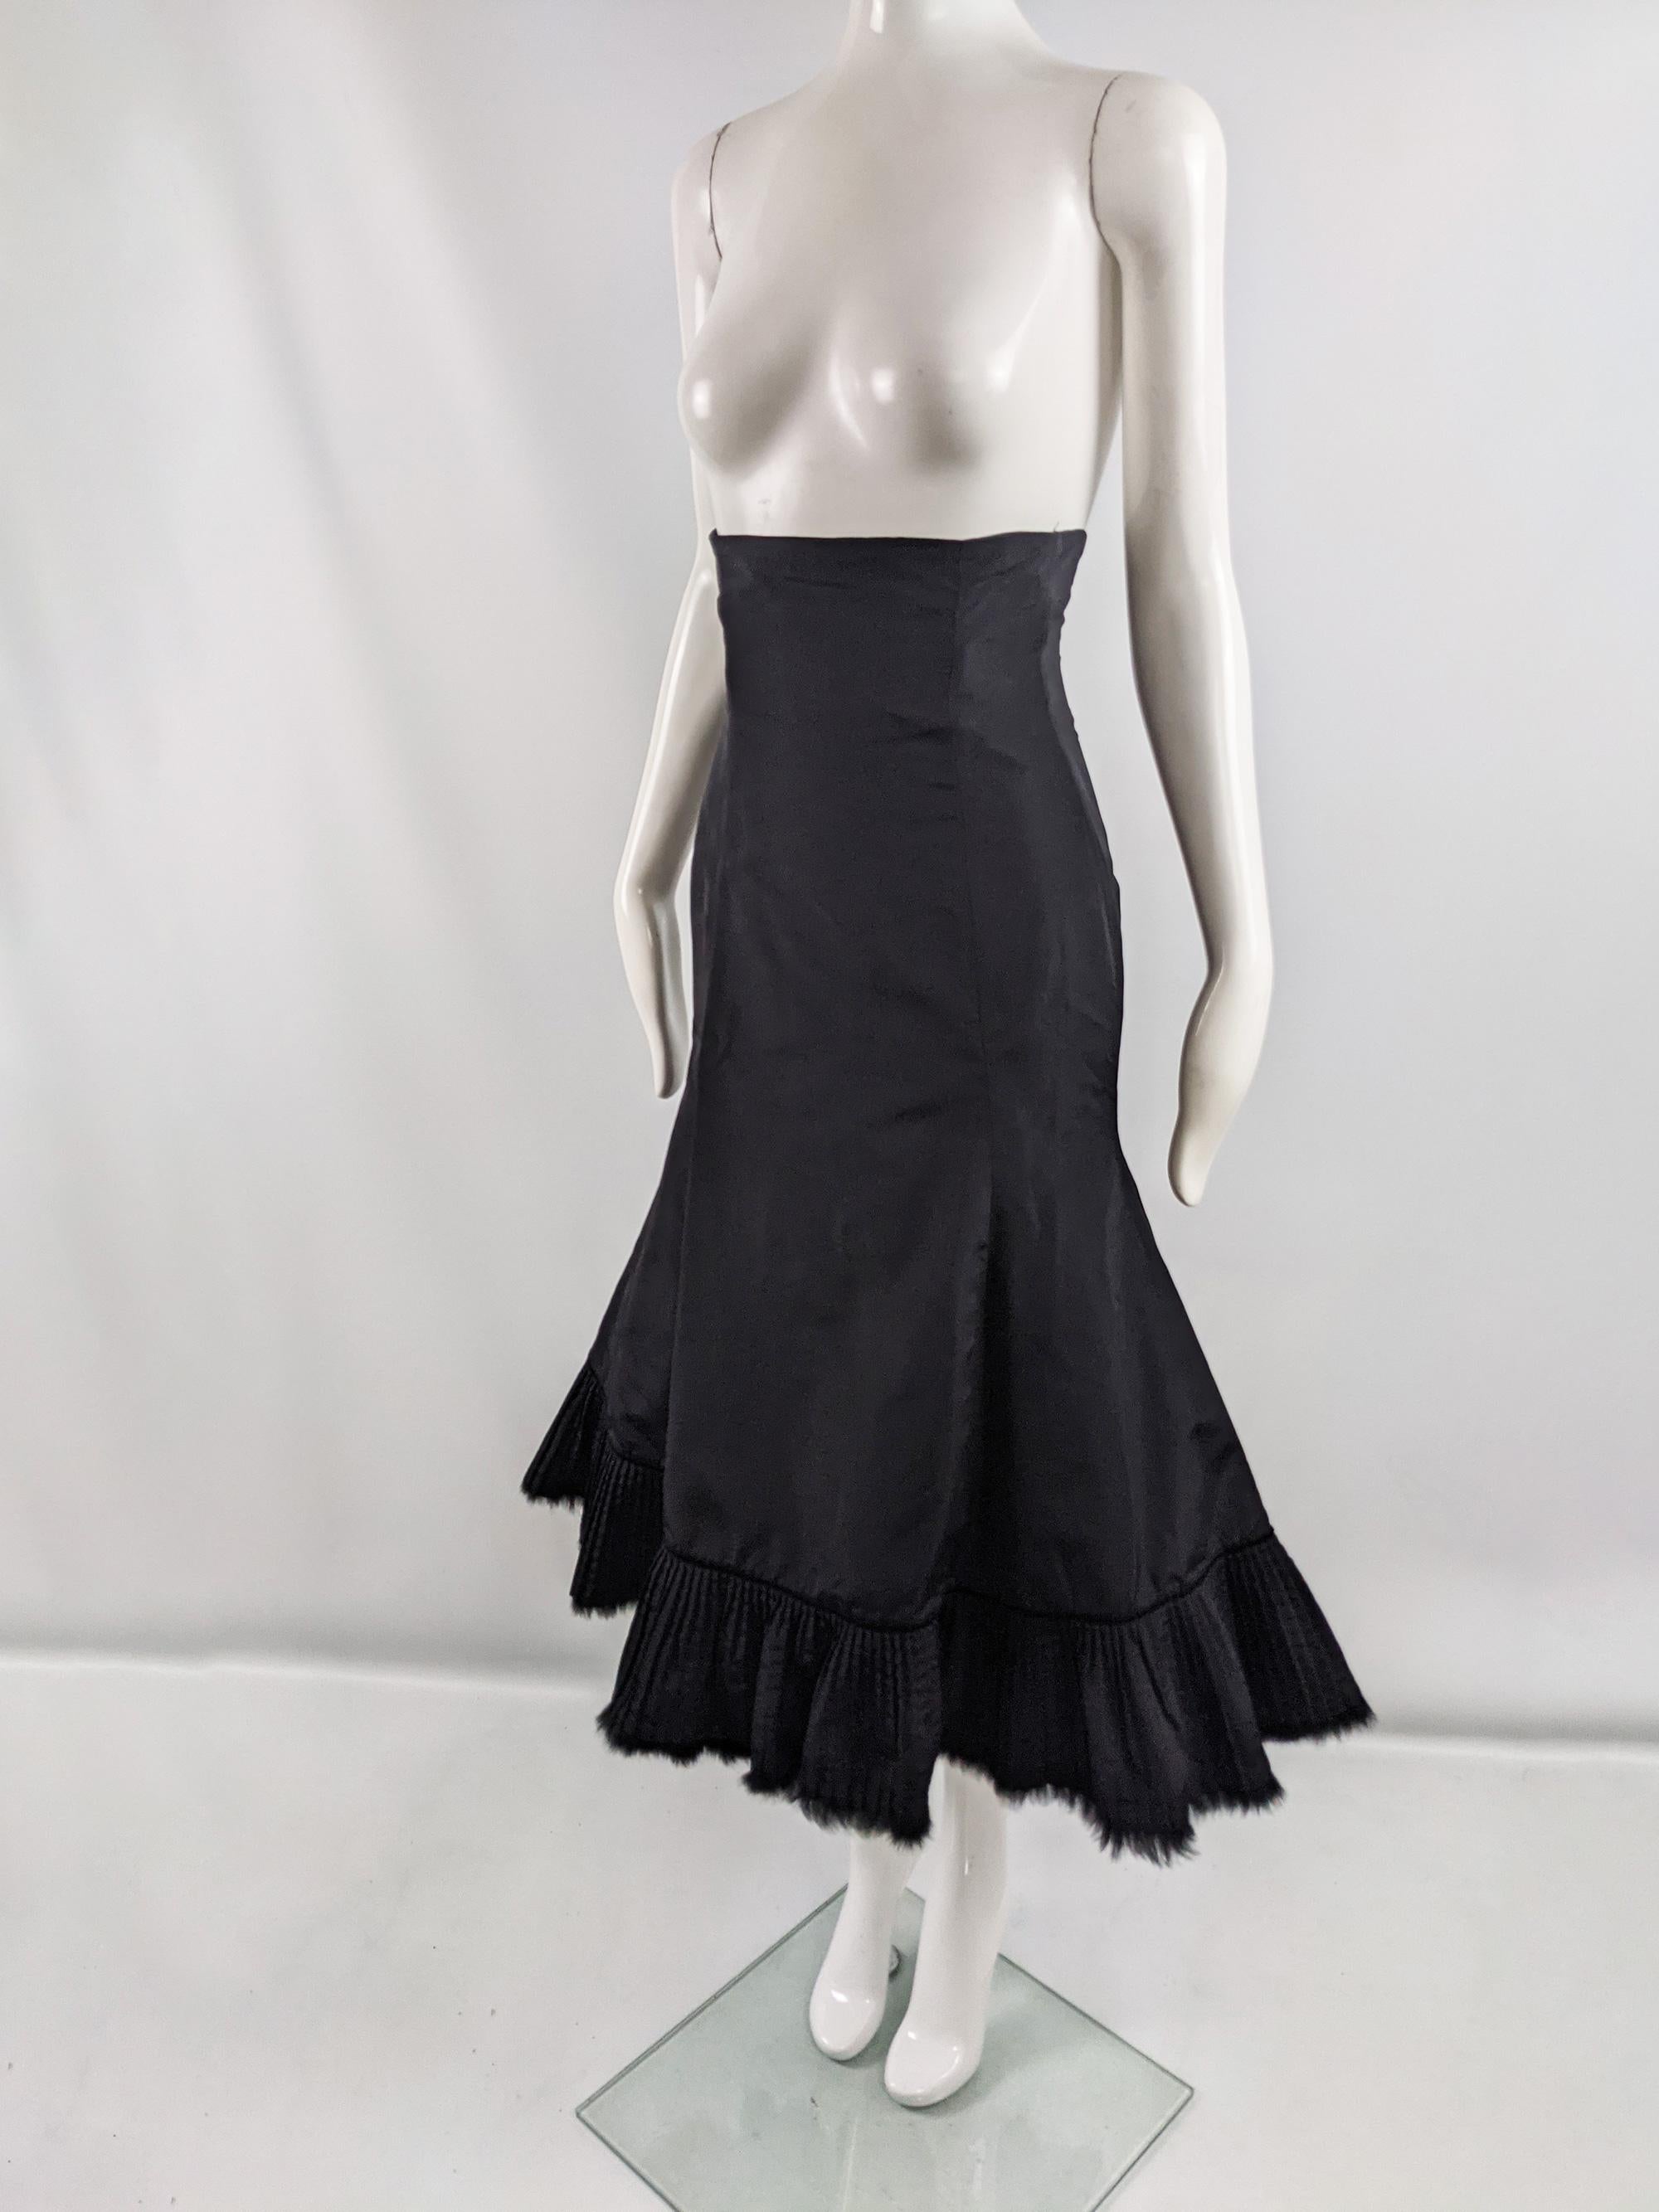 Alexander McQueen Black Taffeta Ultra High Waist Fur Trim Fishtail Skirt, 2005 In Excellent Condition For Sale In Doncaster, South Yorkshire